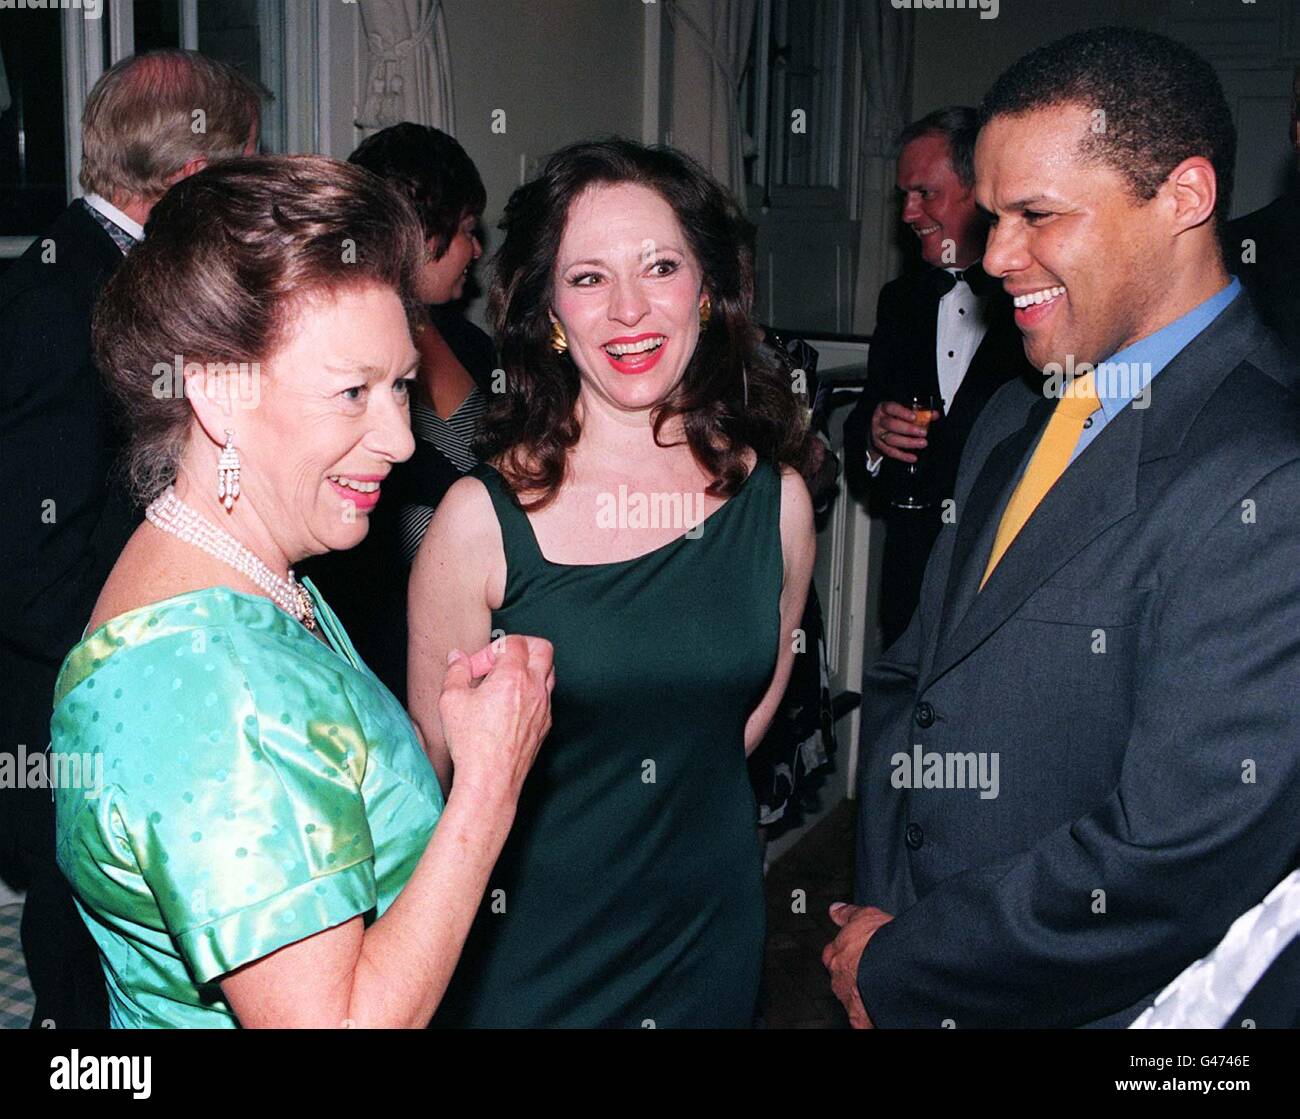 Princess Margaret attended the Royal Westend Premiere to Benefit Charities of Goodby Girl at The Alberty Theatre, St Martins Lane in London tonight (Wednesday). The Princess (left) shares a joke with the shows stars Ann Crumb and Gary Wilmot. Photo by John Stillwell/PA. (WPA Rota pic) Stock Photo